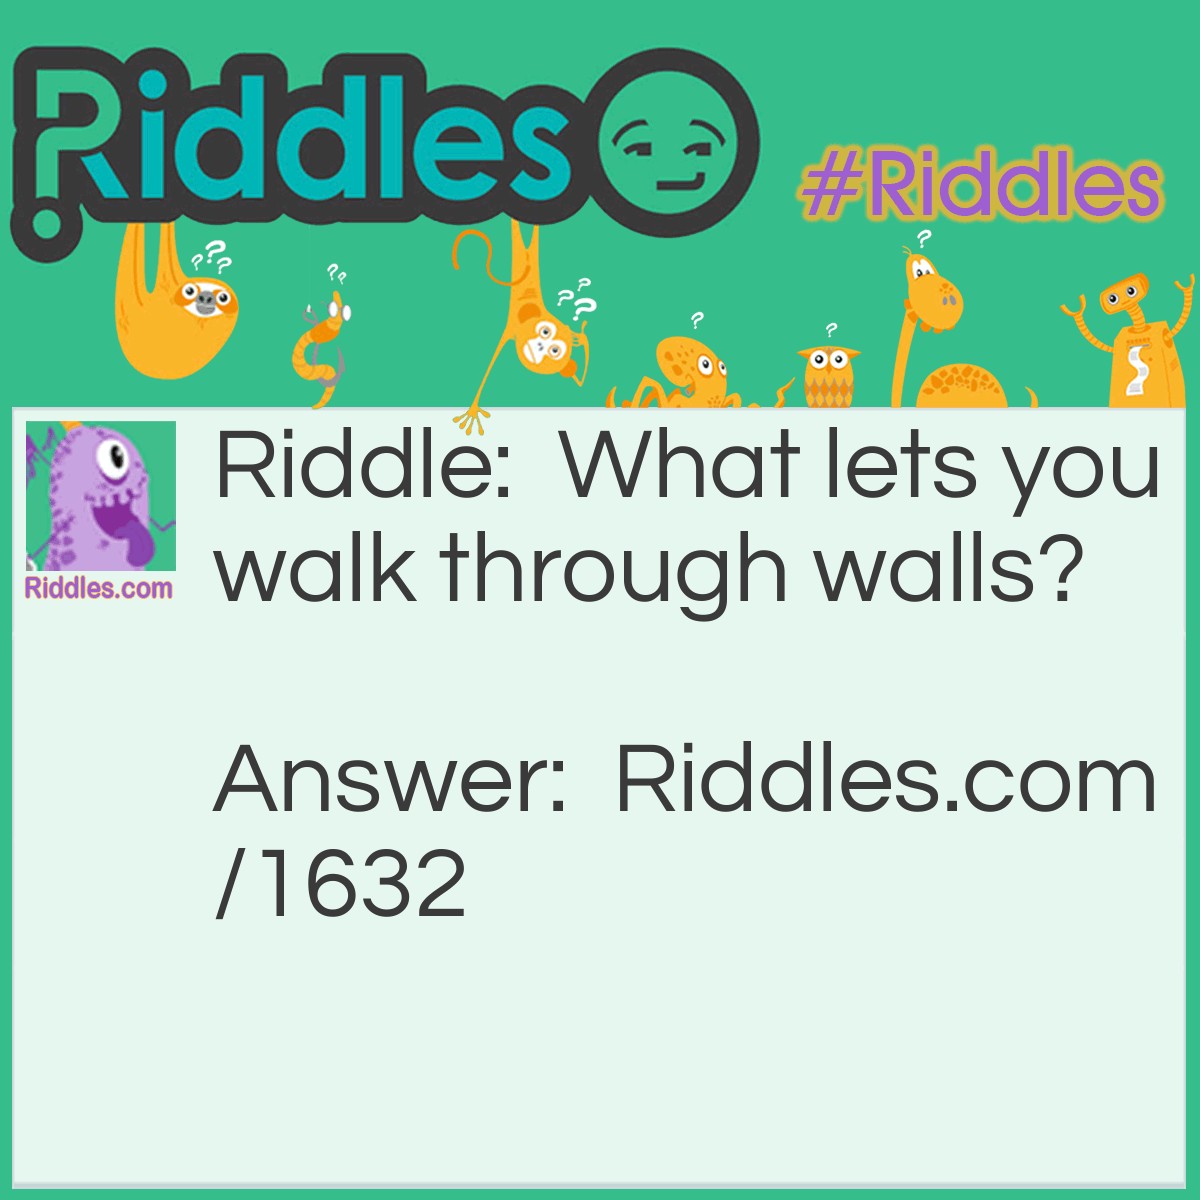 Riddle: What lets you walk through walls? Answer: Doors!